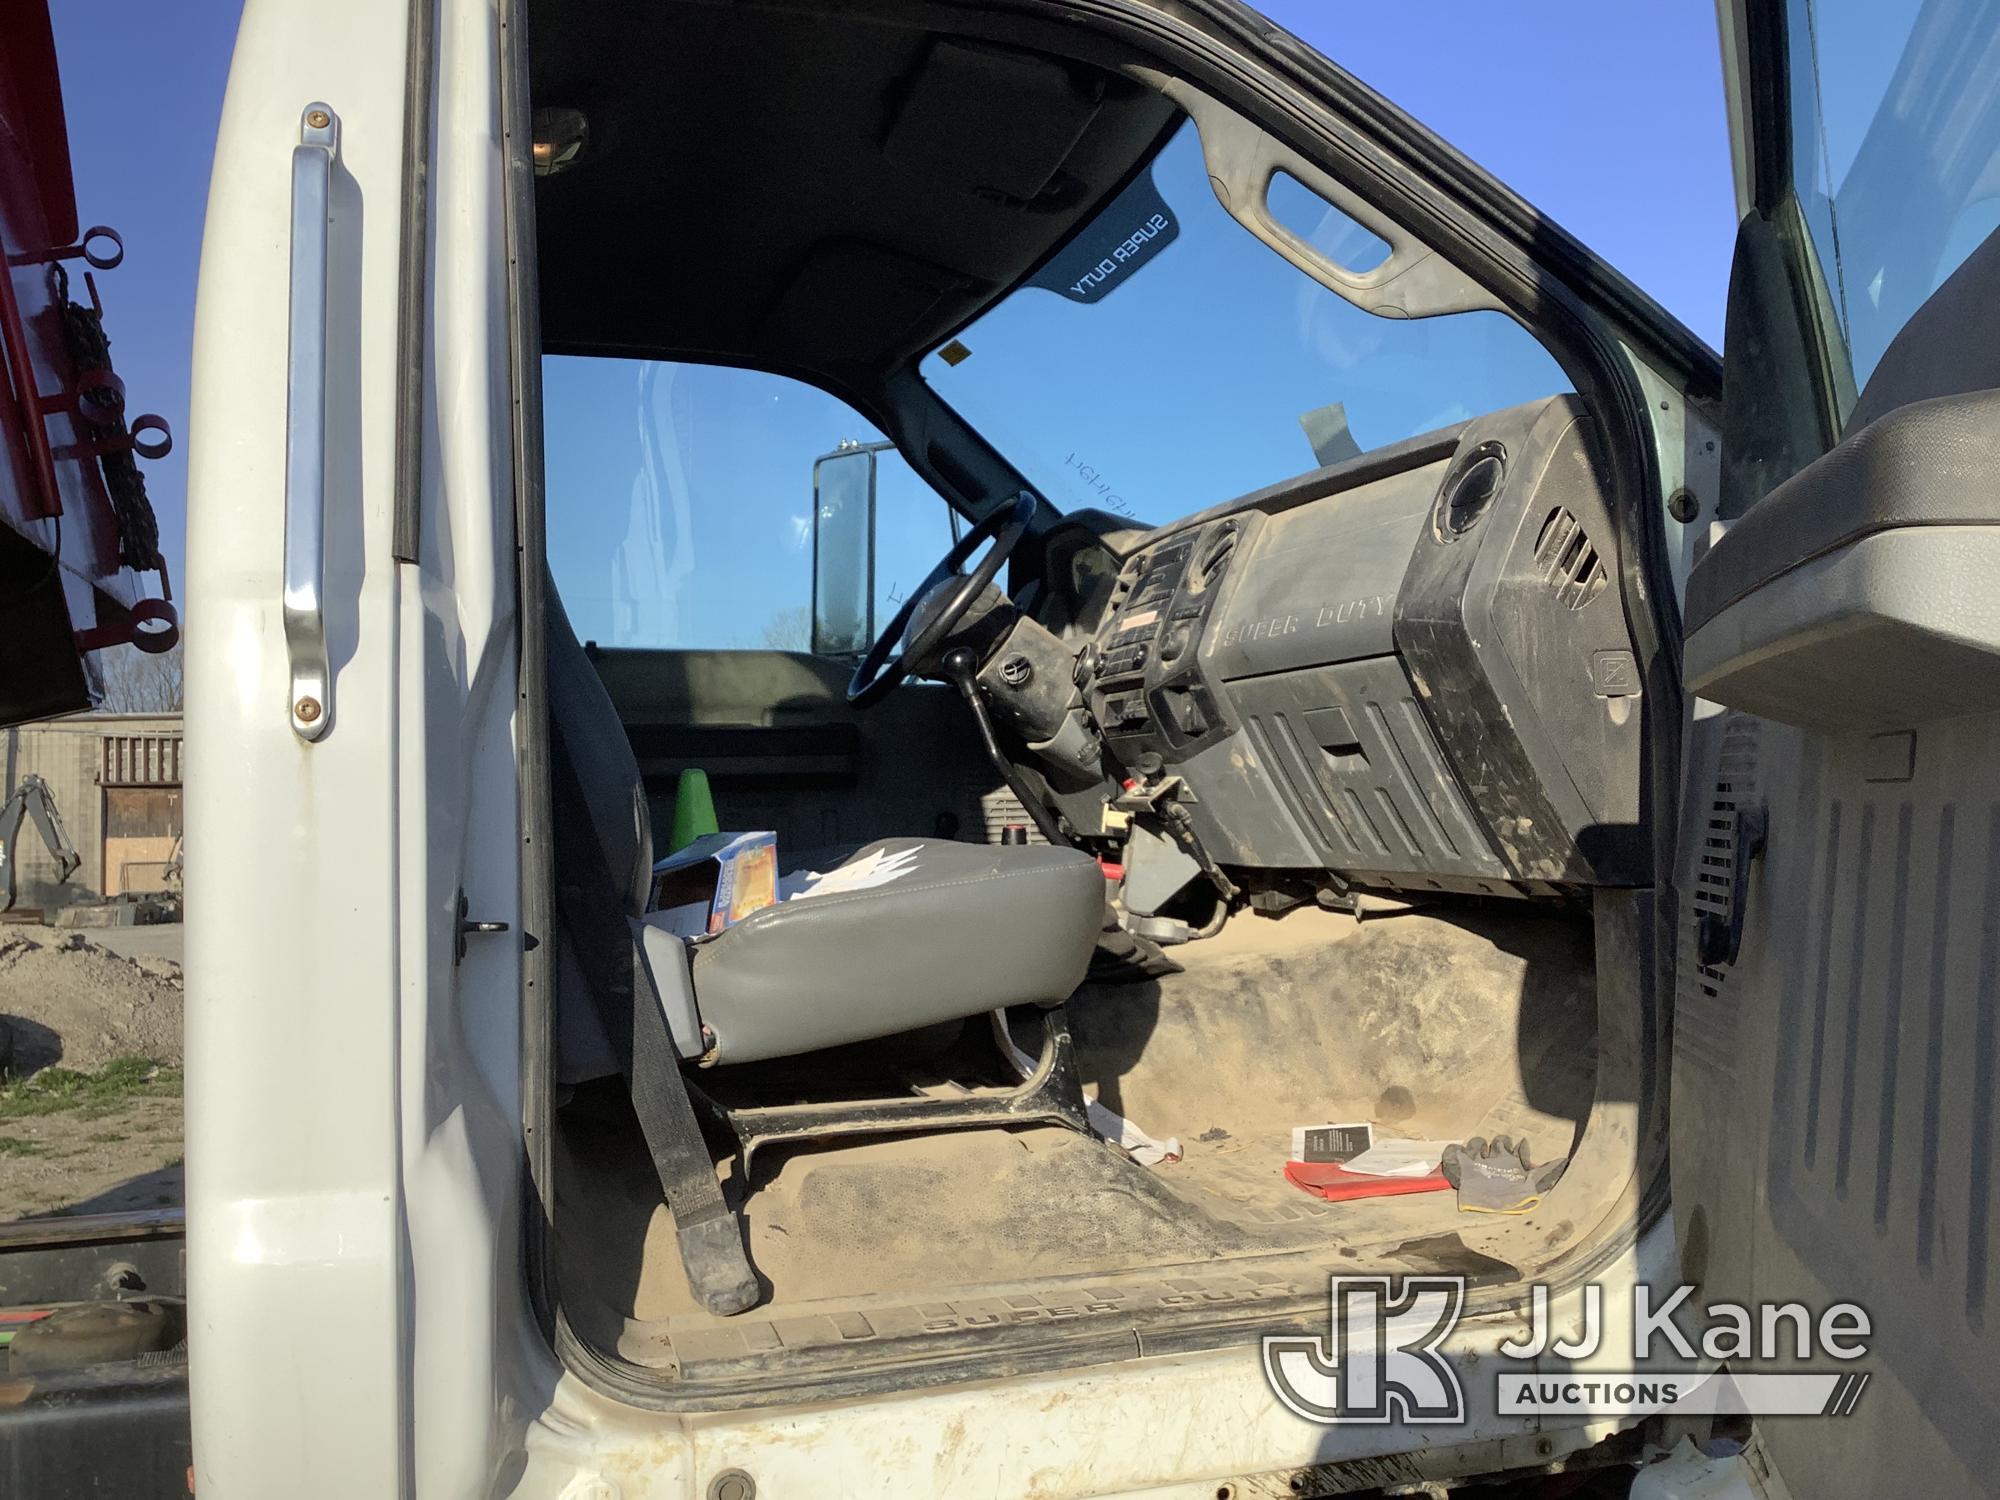 (Houston, PA) 2013 Ford F750 Dump Truck Runs, Moves & Operates, Check Engine Light On, Rust Damage